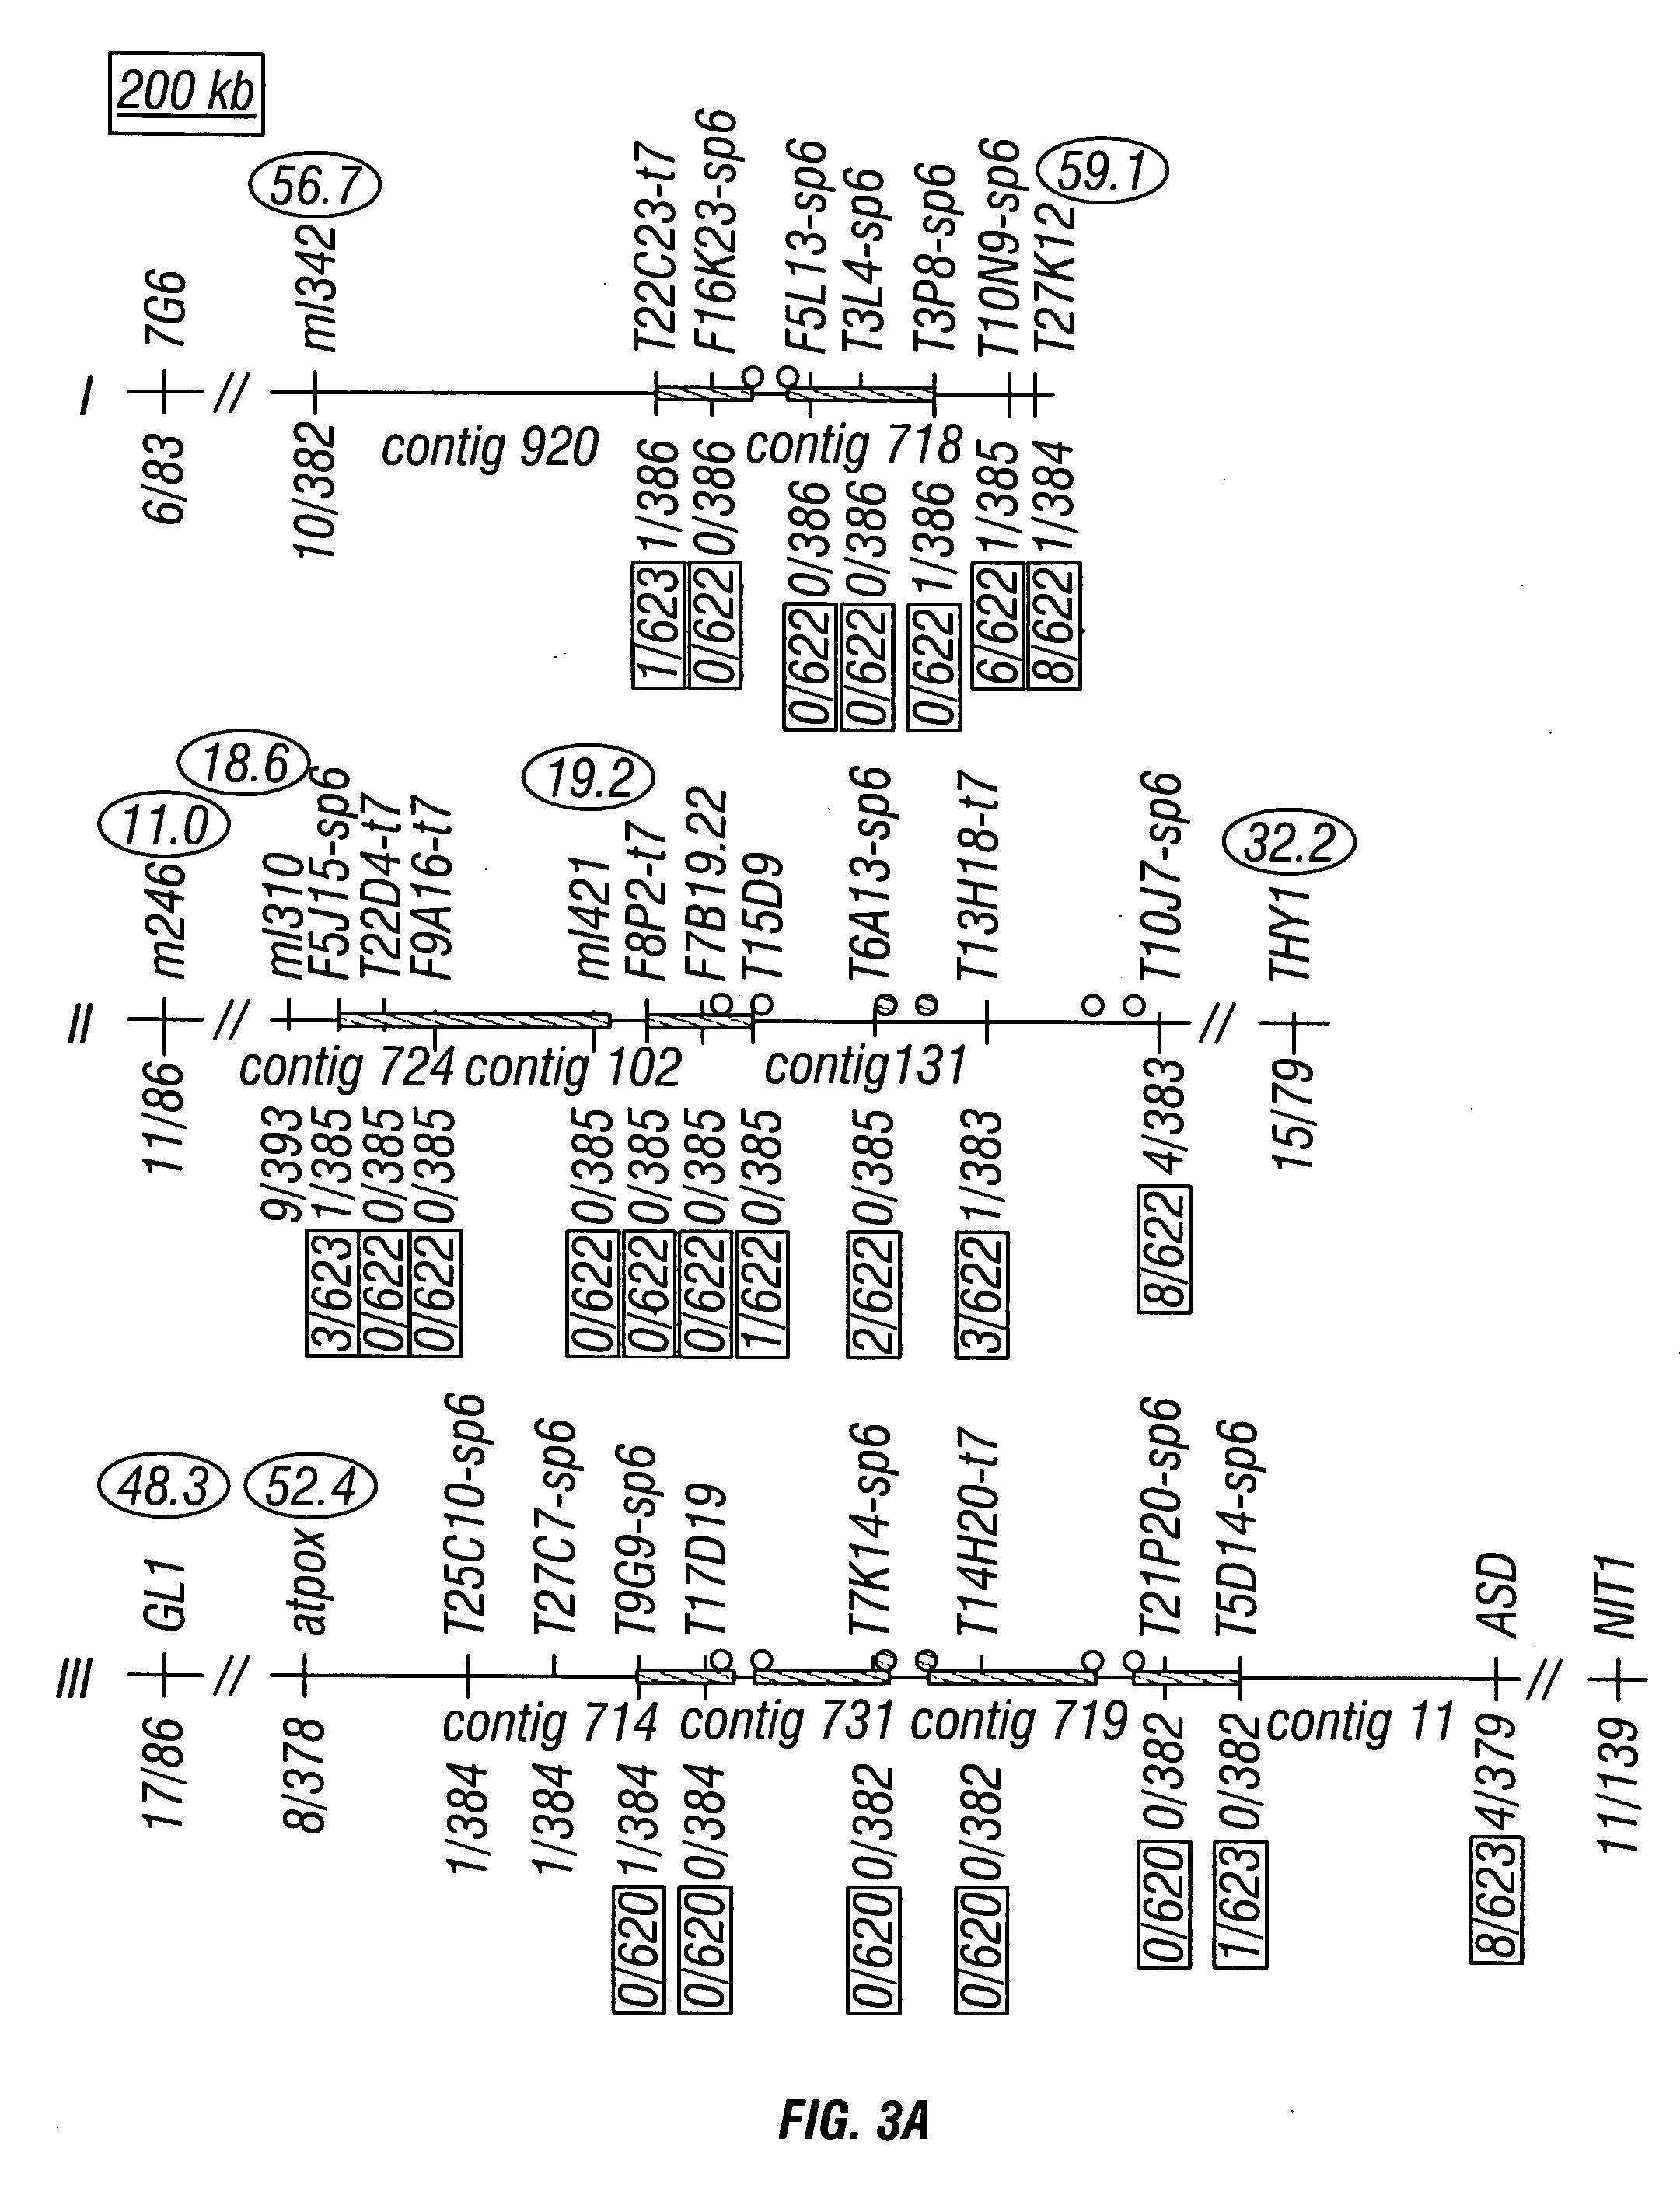 Plant chromosome compositions and methods